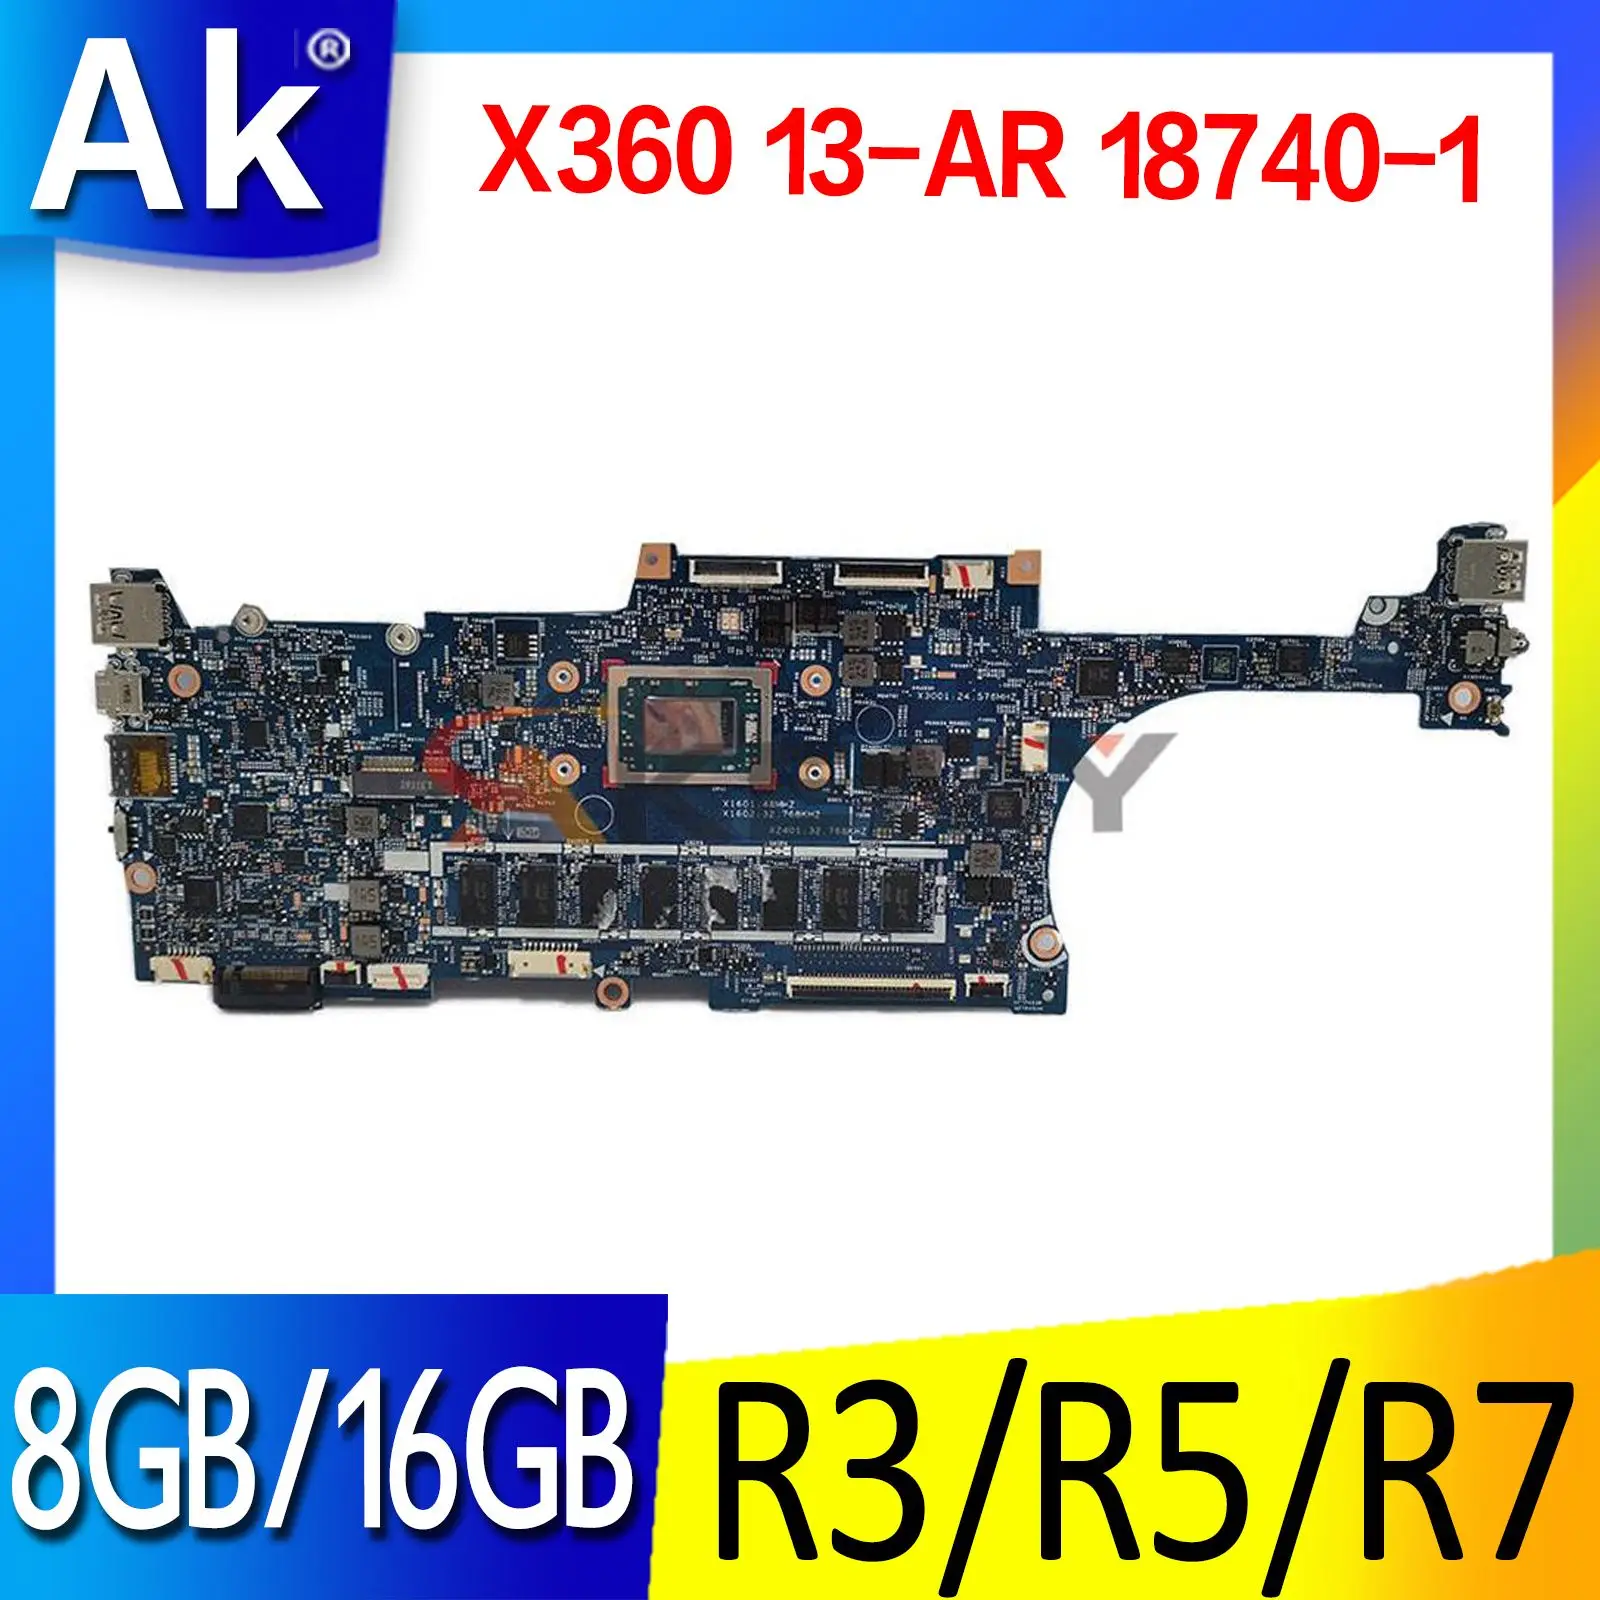 

For HP ENVY X360 13-ar laptop motherboard Mainboard with R3 R5 R7 AMD CPU 8GB 16GB RAM 18740-1 motherboard